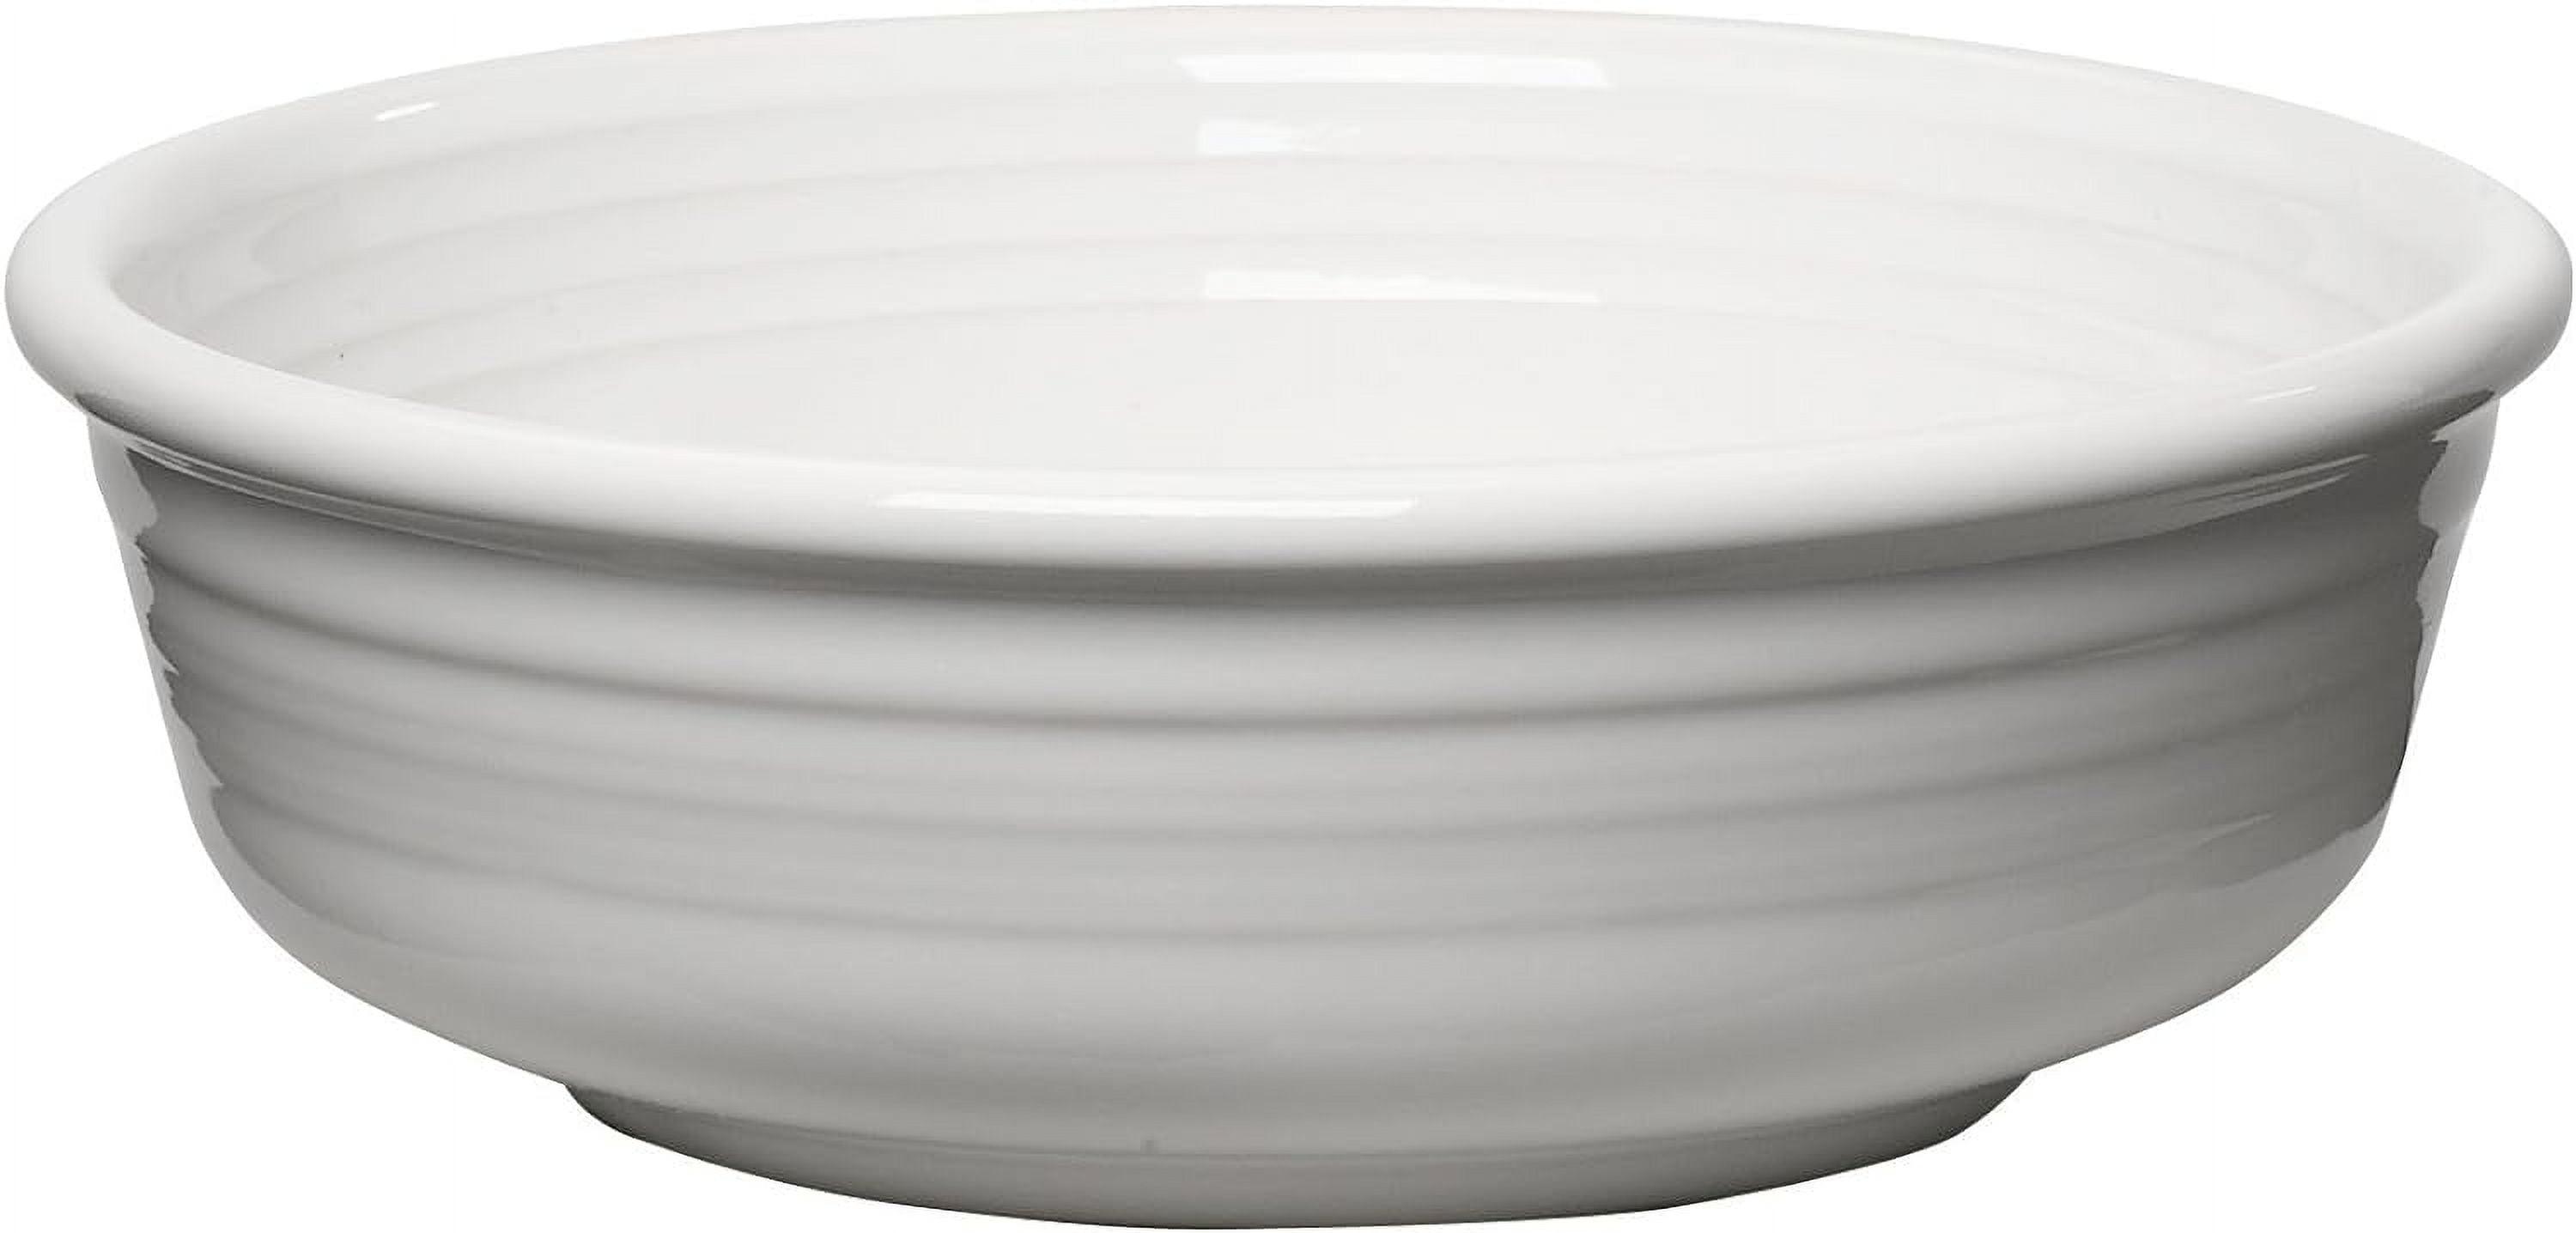 Classic Round Ceramic 14.25oz White Bowl for Soup and Cereal